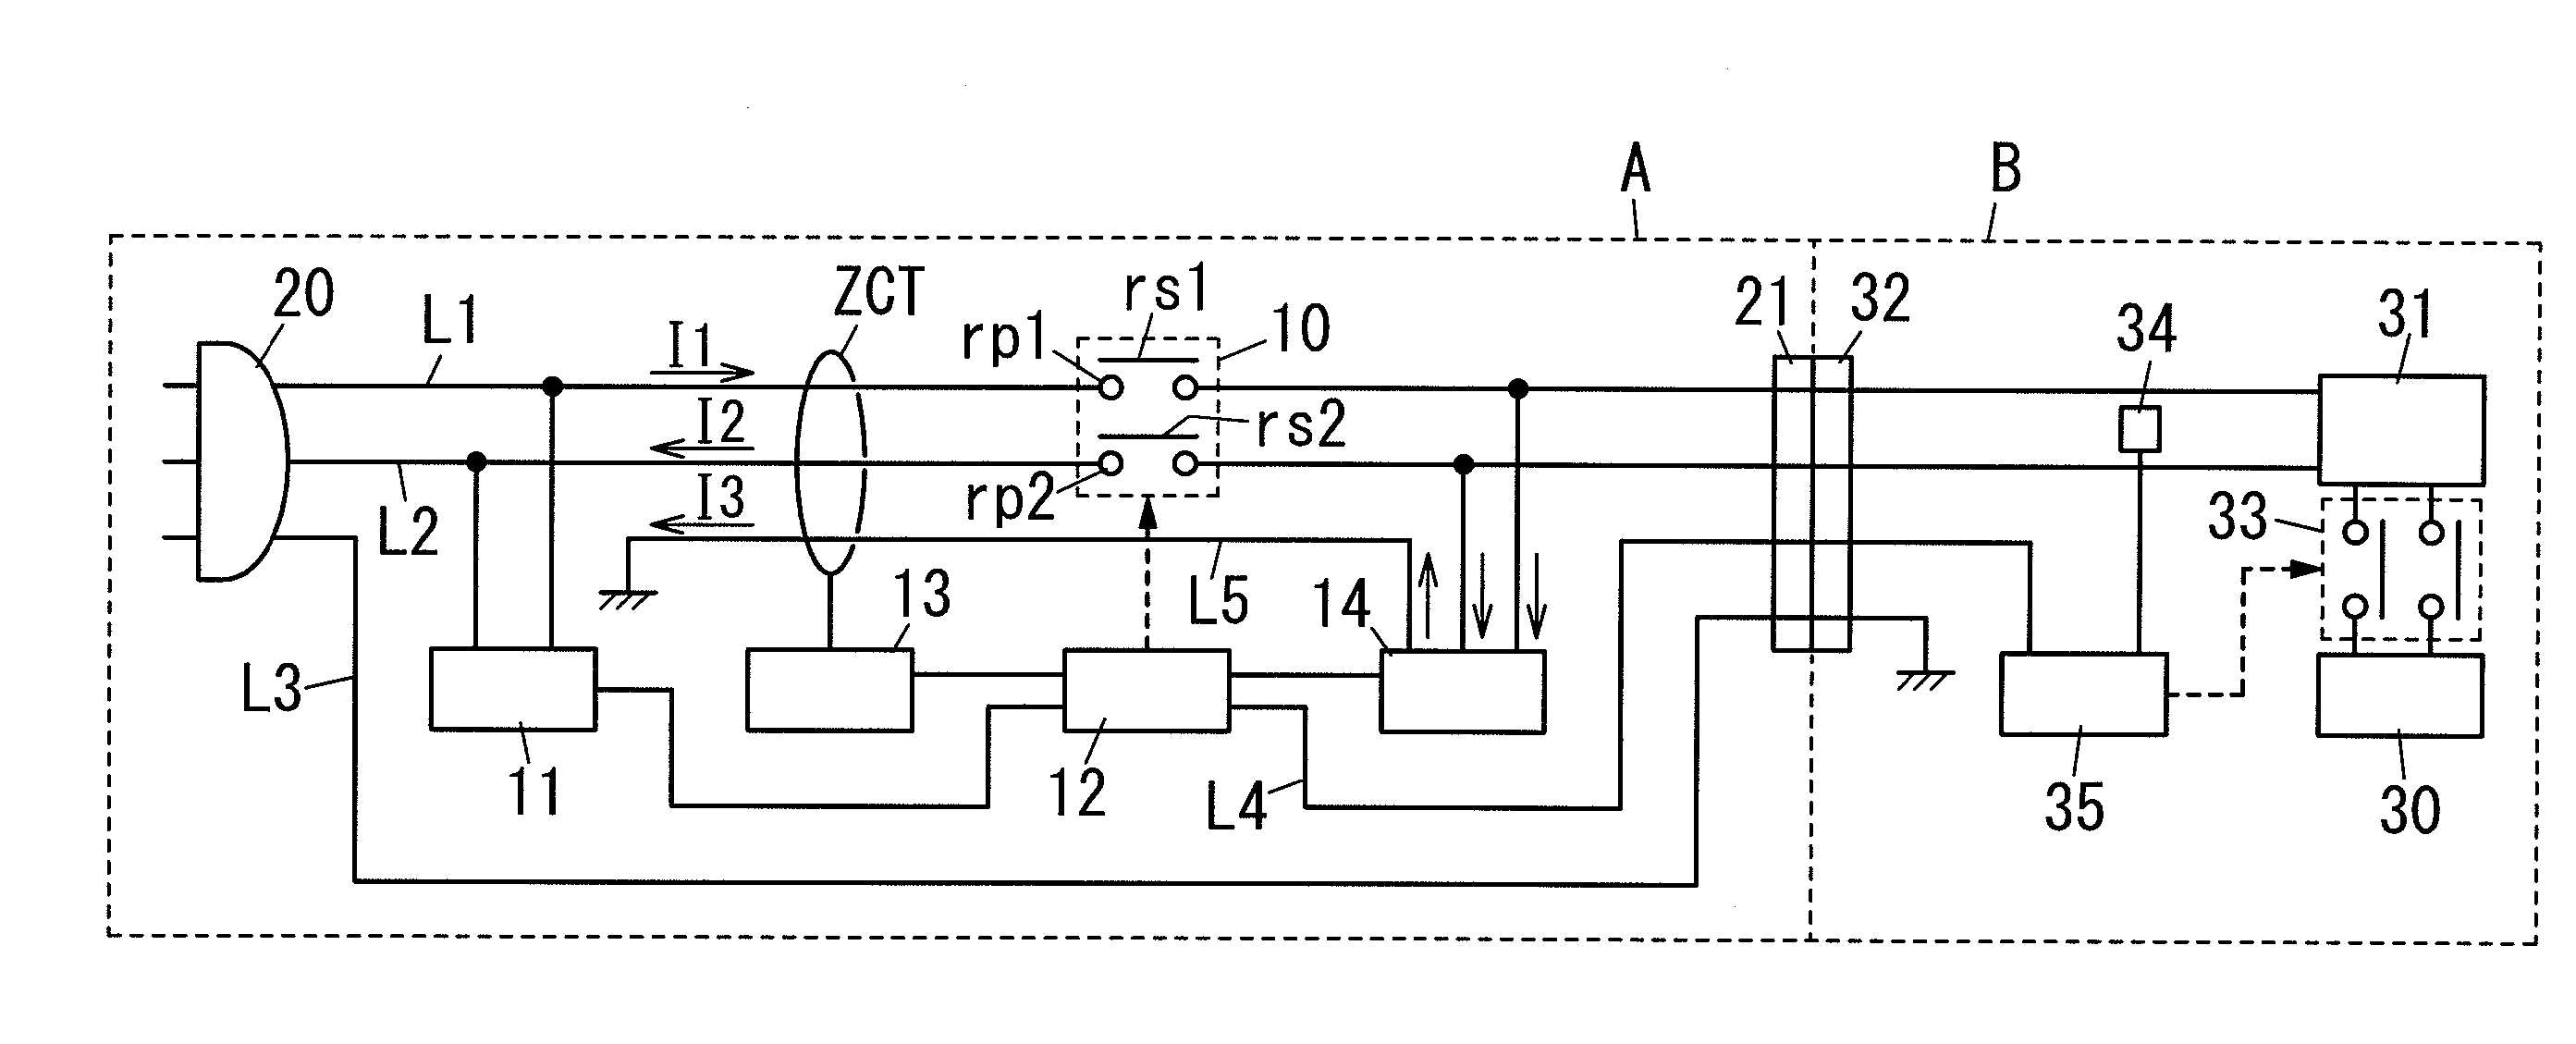 Power feed control device